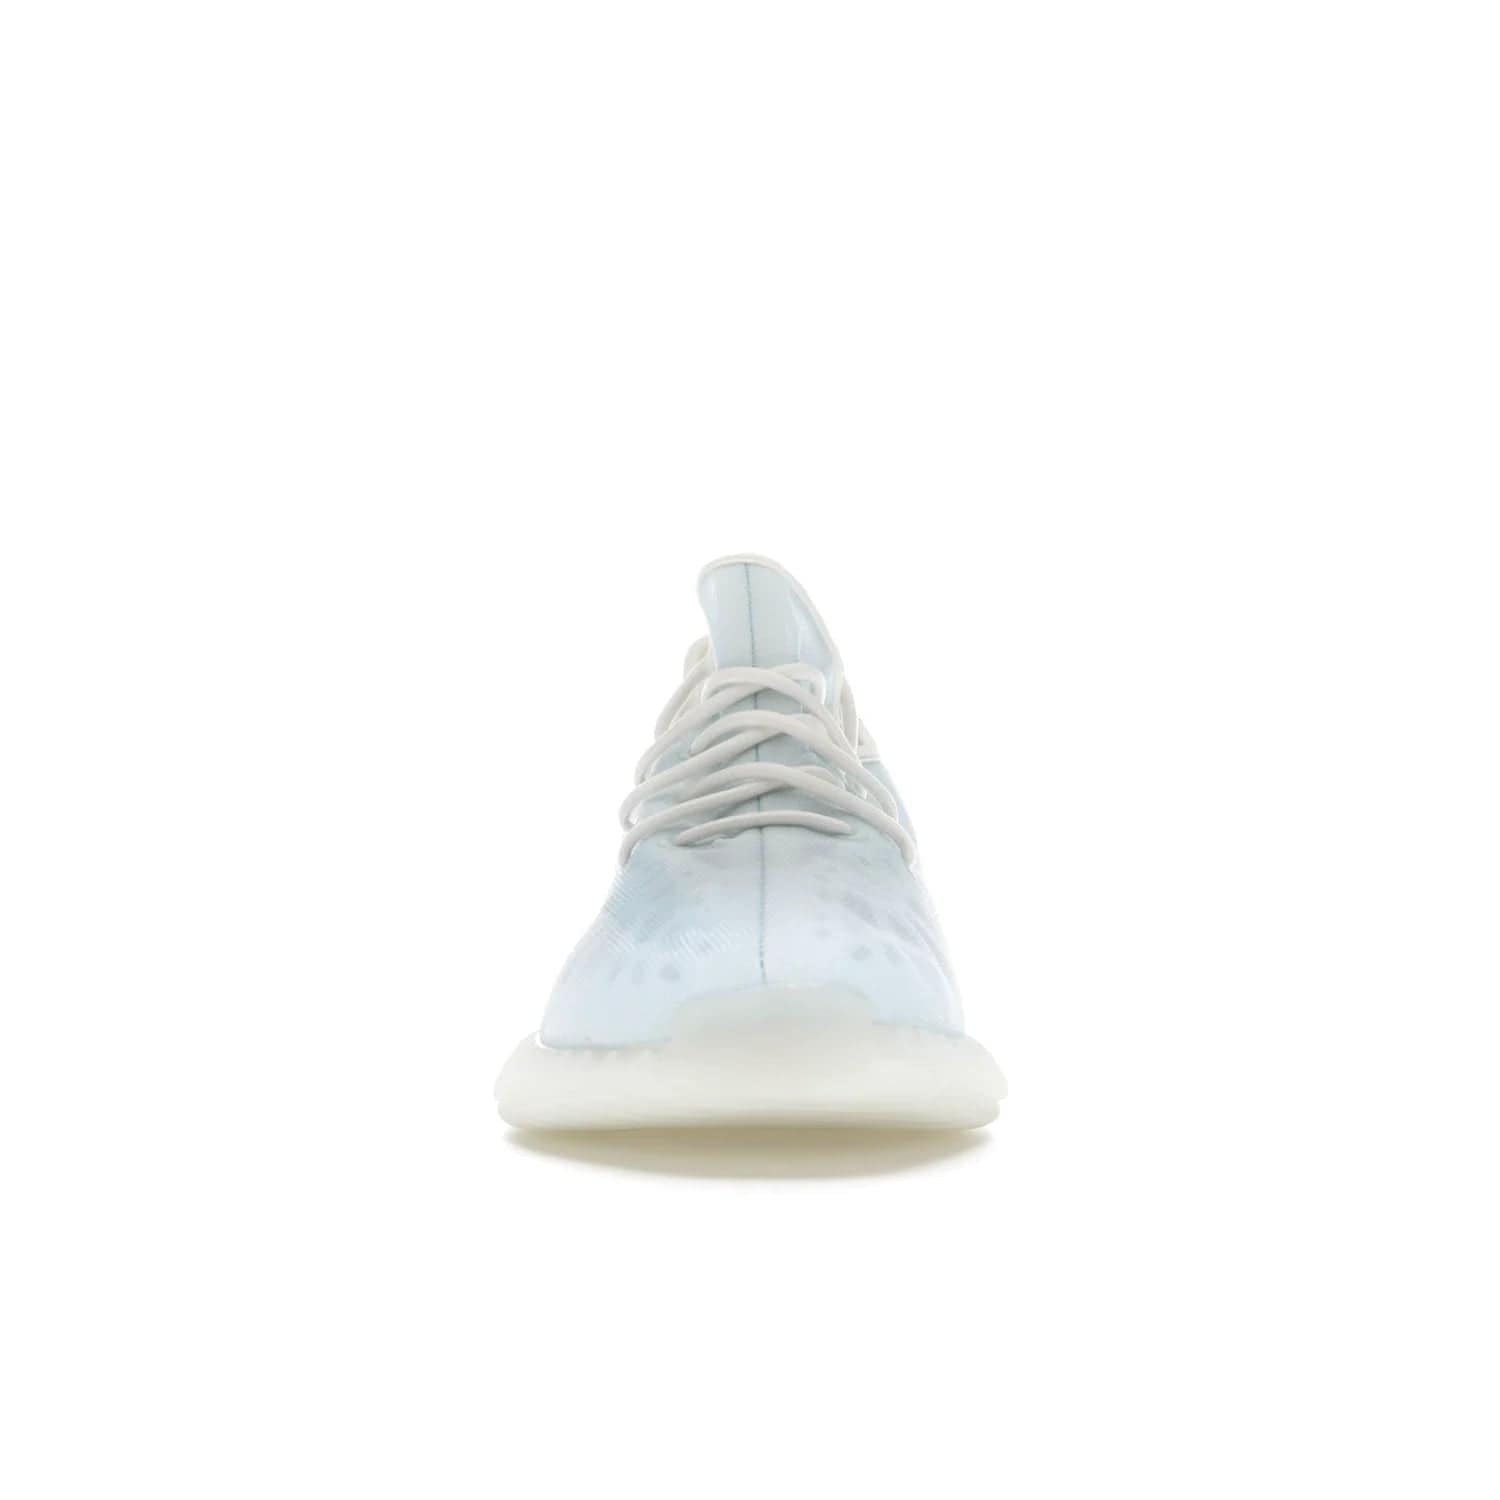 adidas Yeezy Boost 350 V2 Mono Ice - Image 10 - Only at www.BallersClubKickz.com - Introducing the adidas Yeezy 350 V2 Mono Ice - a sleek monofilament mesh design in Ice blue with Boost sole and heel pull tab. Released exclusively in the US for $220.